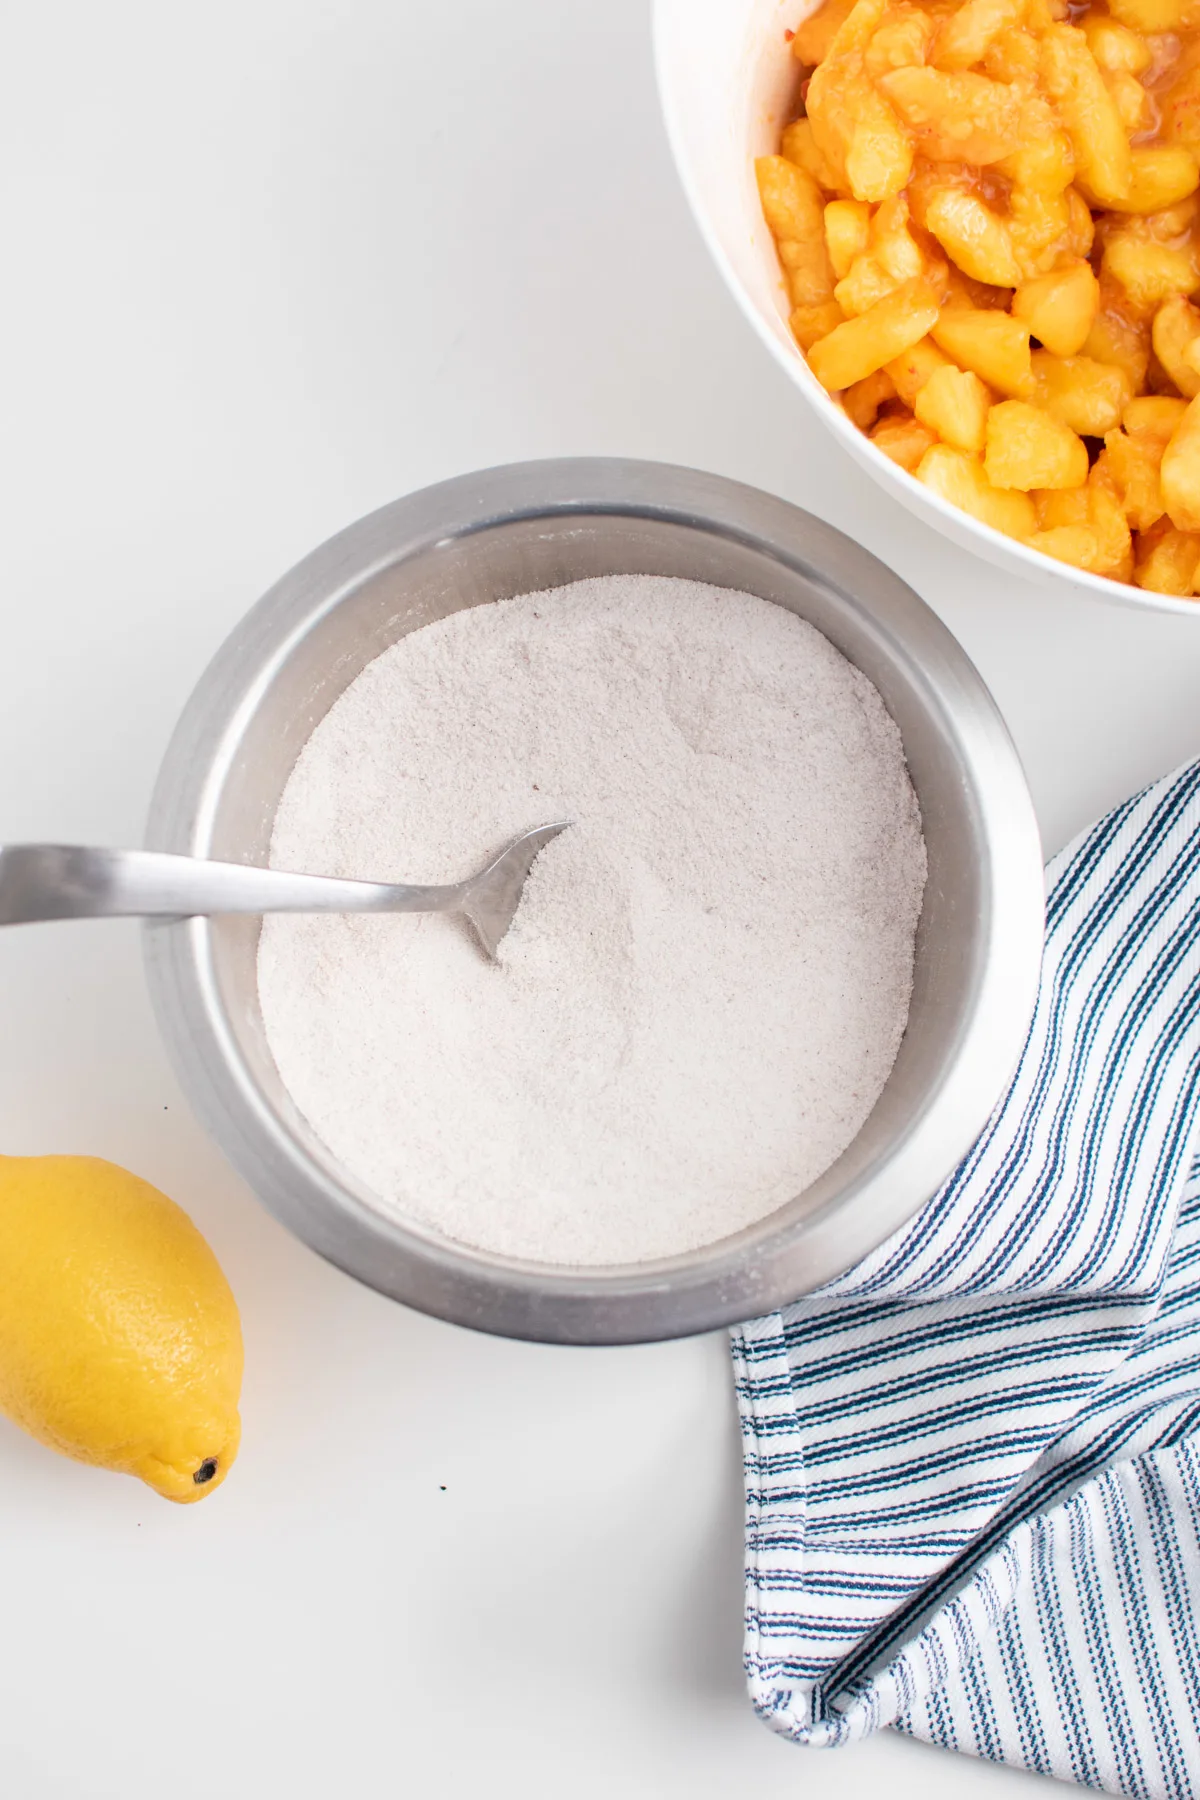 Flour and sugar mixture in small bowl with spoon surrounded by towel, lemon, and sliced peaches.